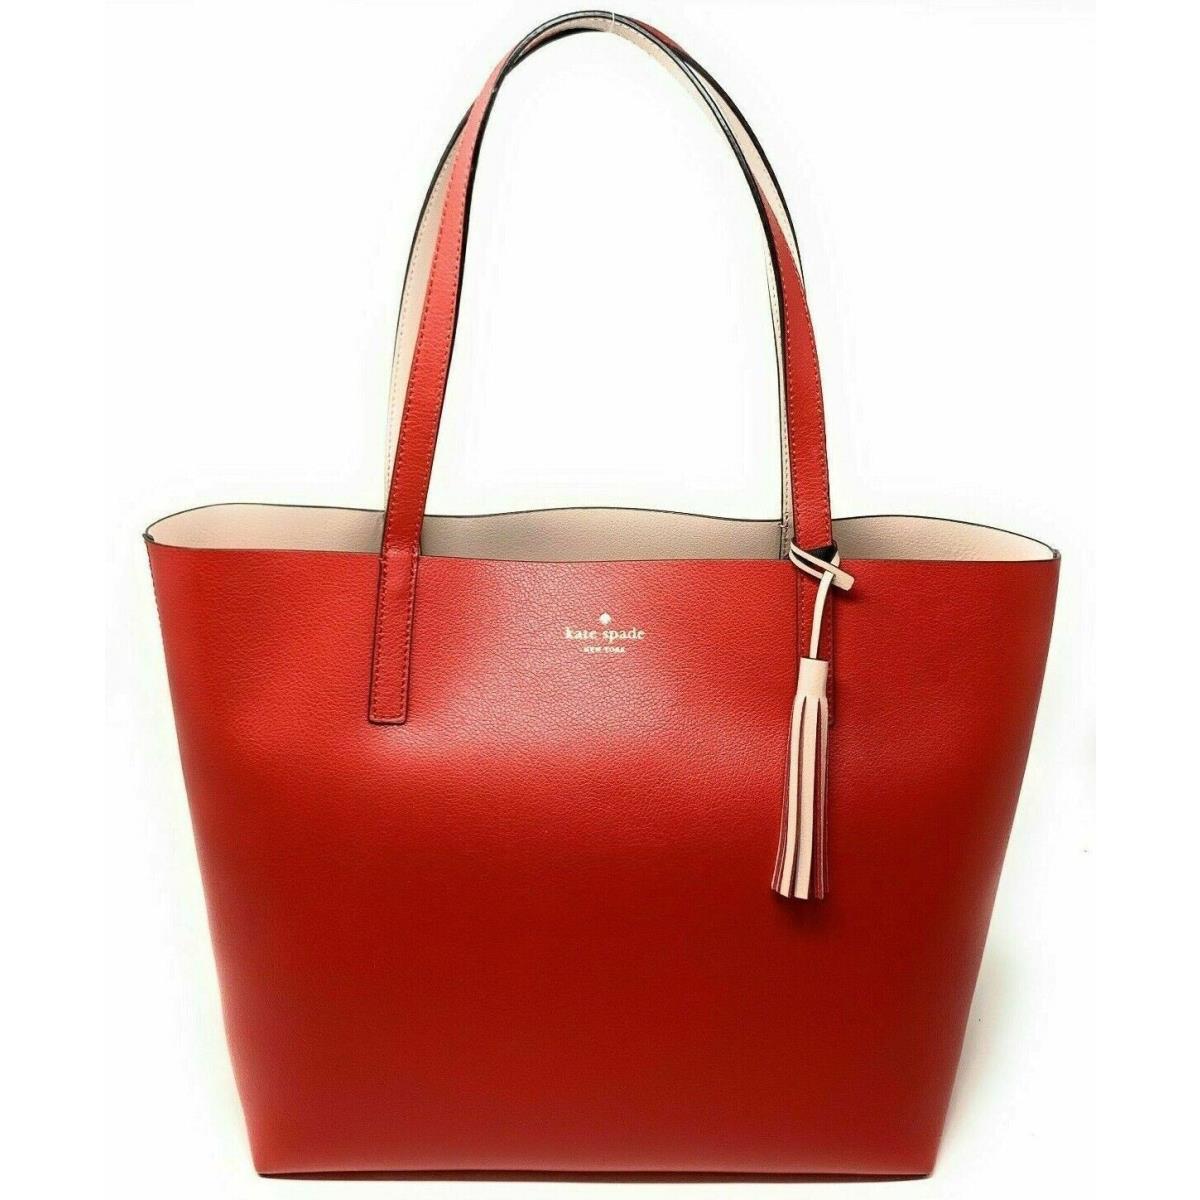 Kate Spade Lakeland Marina Reversible Red / Beige Leather Tote WKRU5342 FS - Red Handle/Strap, Red Exterior